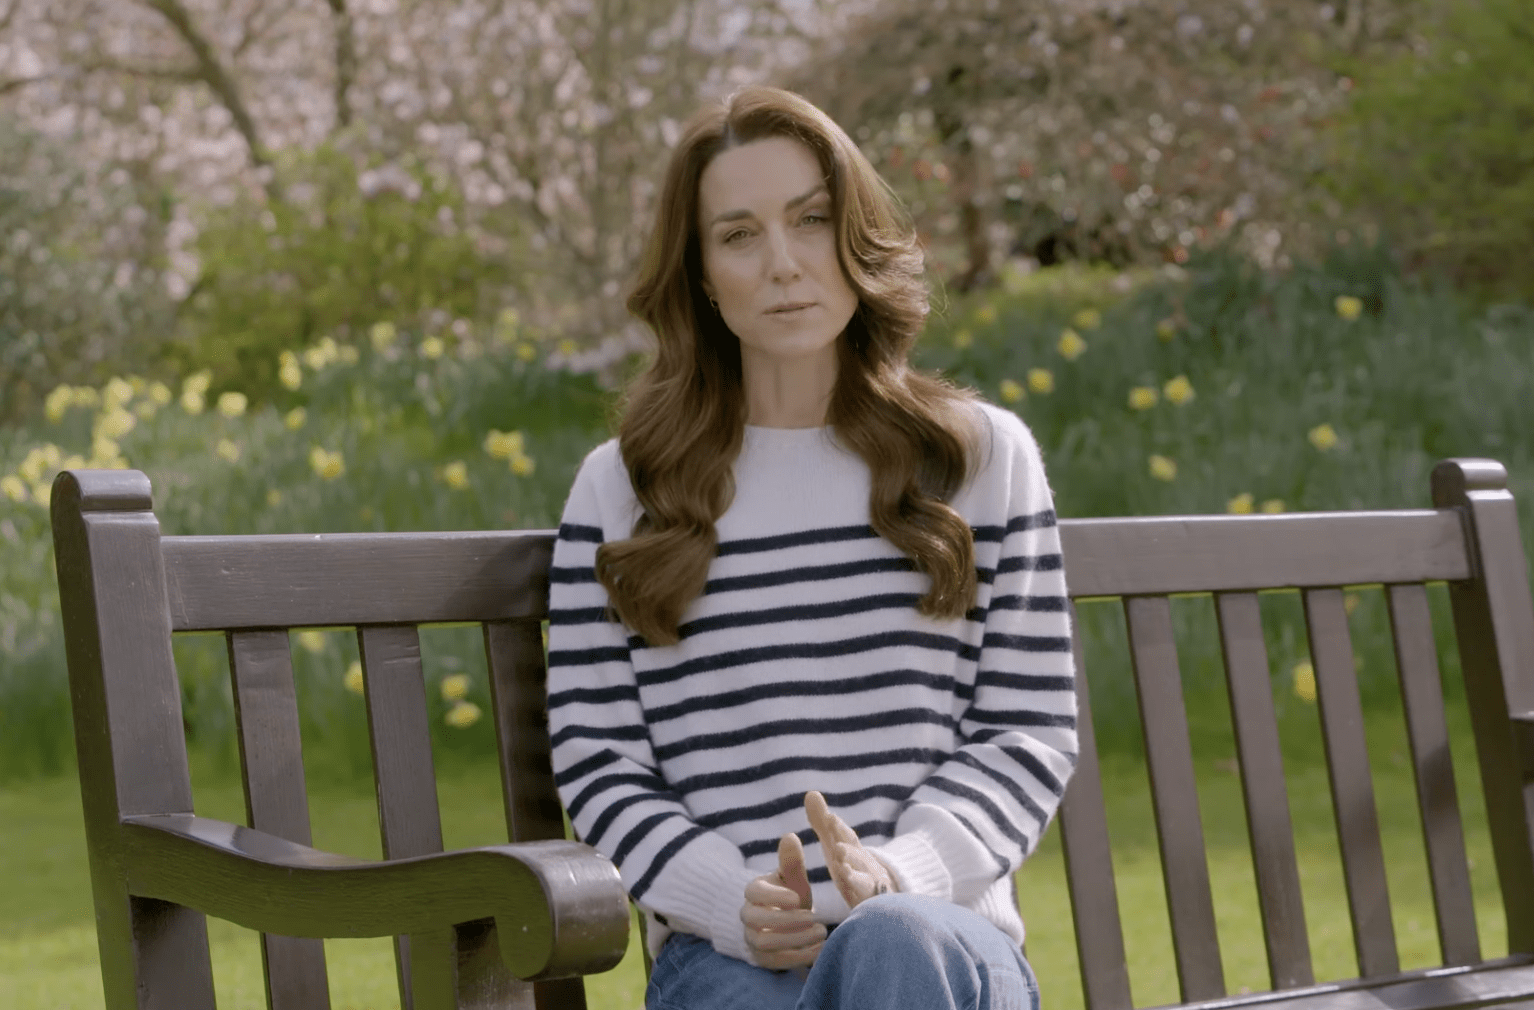 Kate Middleton Announces Cancer Diagnosis After Months of Speculation